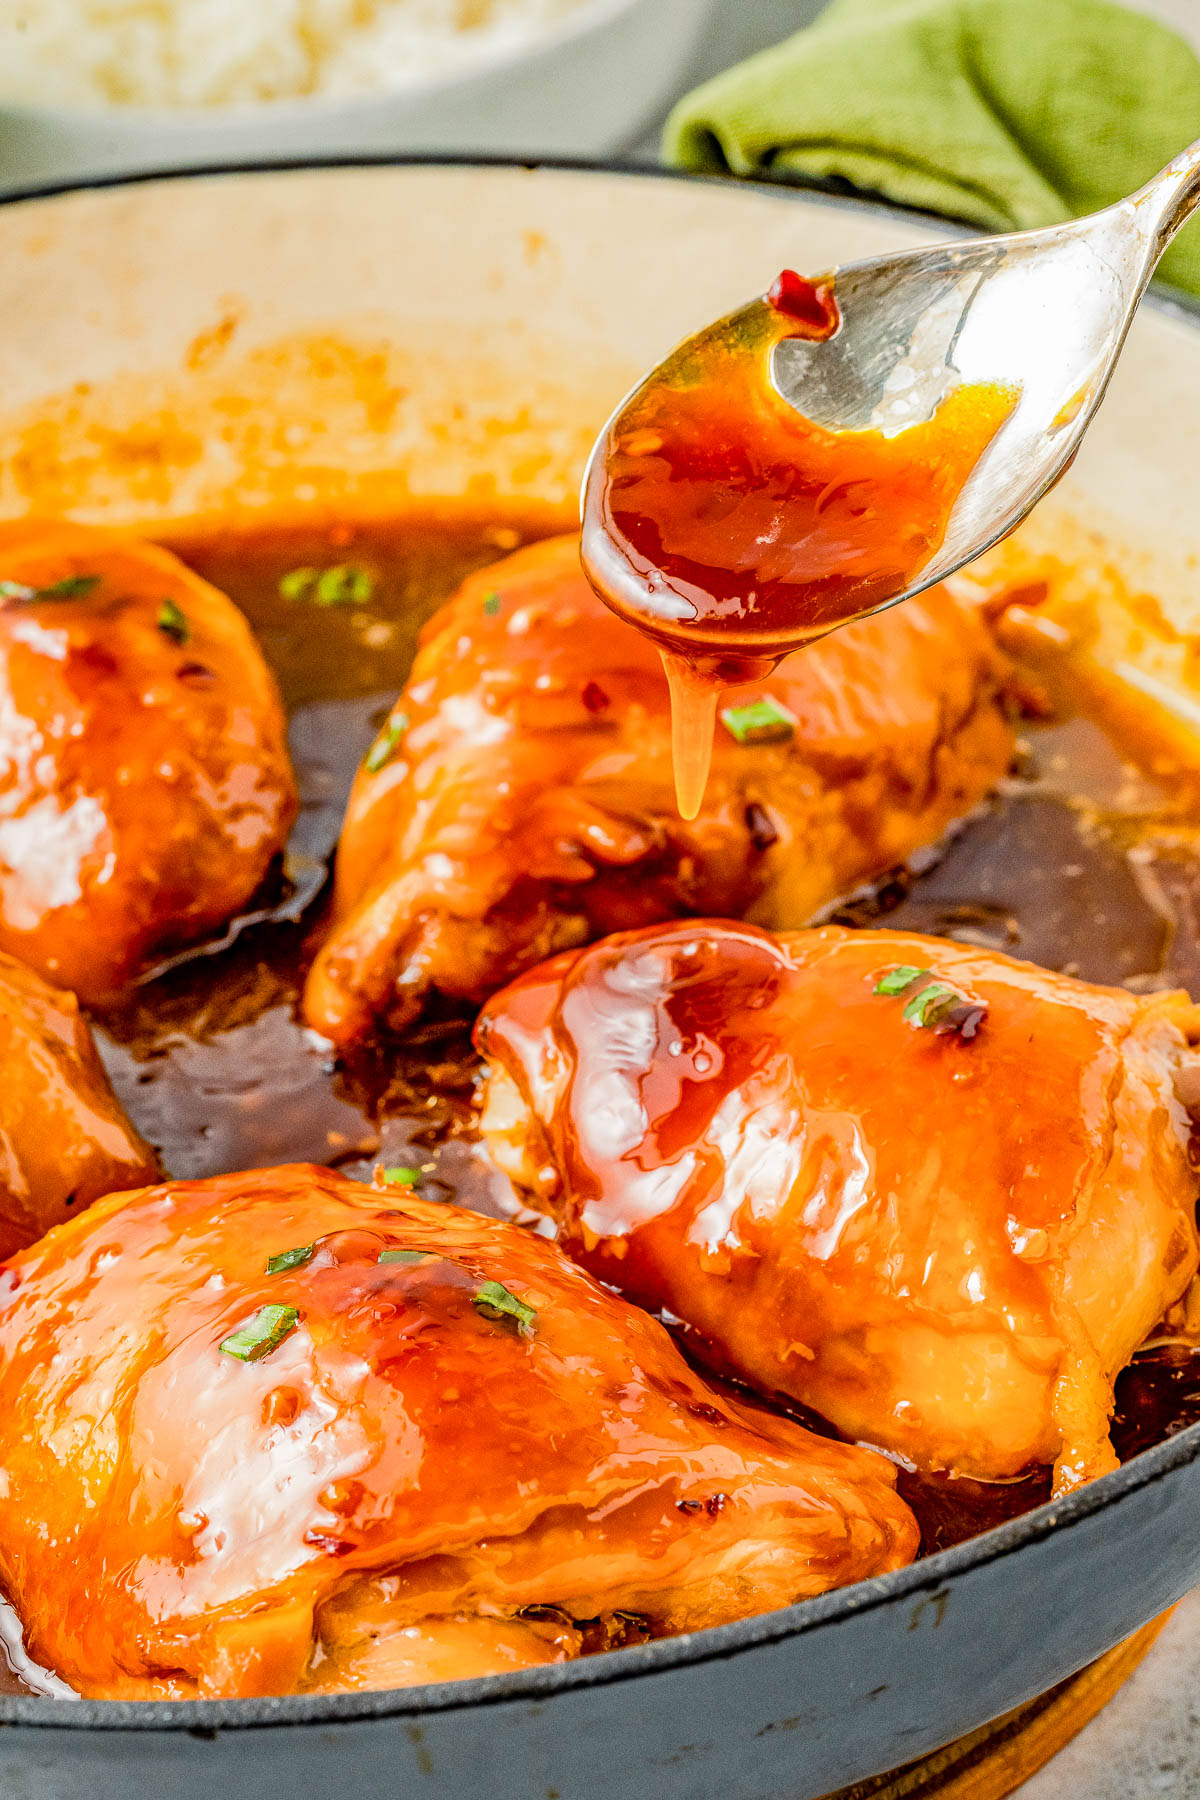 Spoon drizzling sauce over chicken breasts in a skillet, highlighting the shiny, savory glaze and sprinkled herbs.